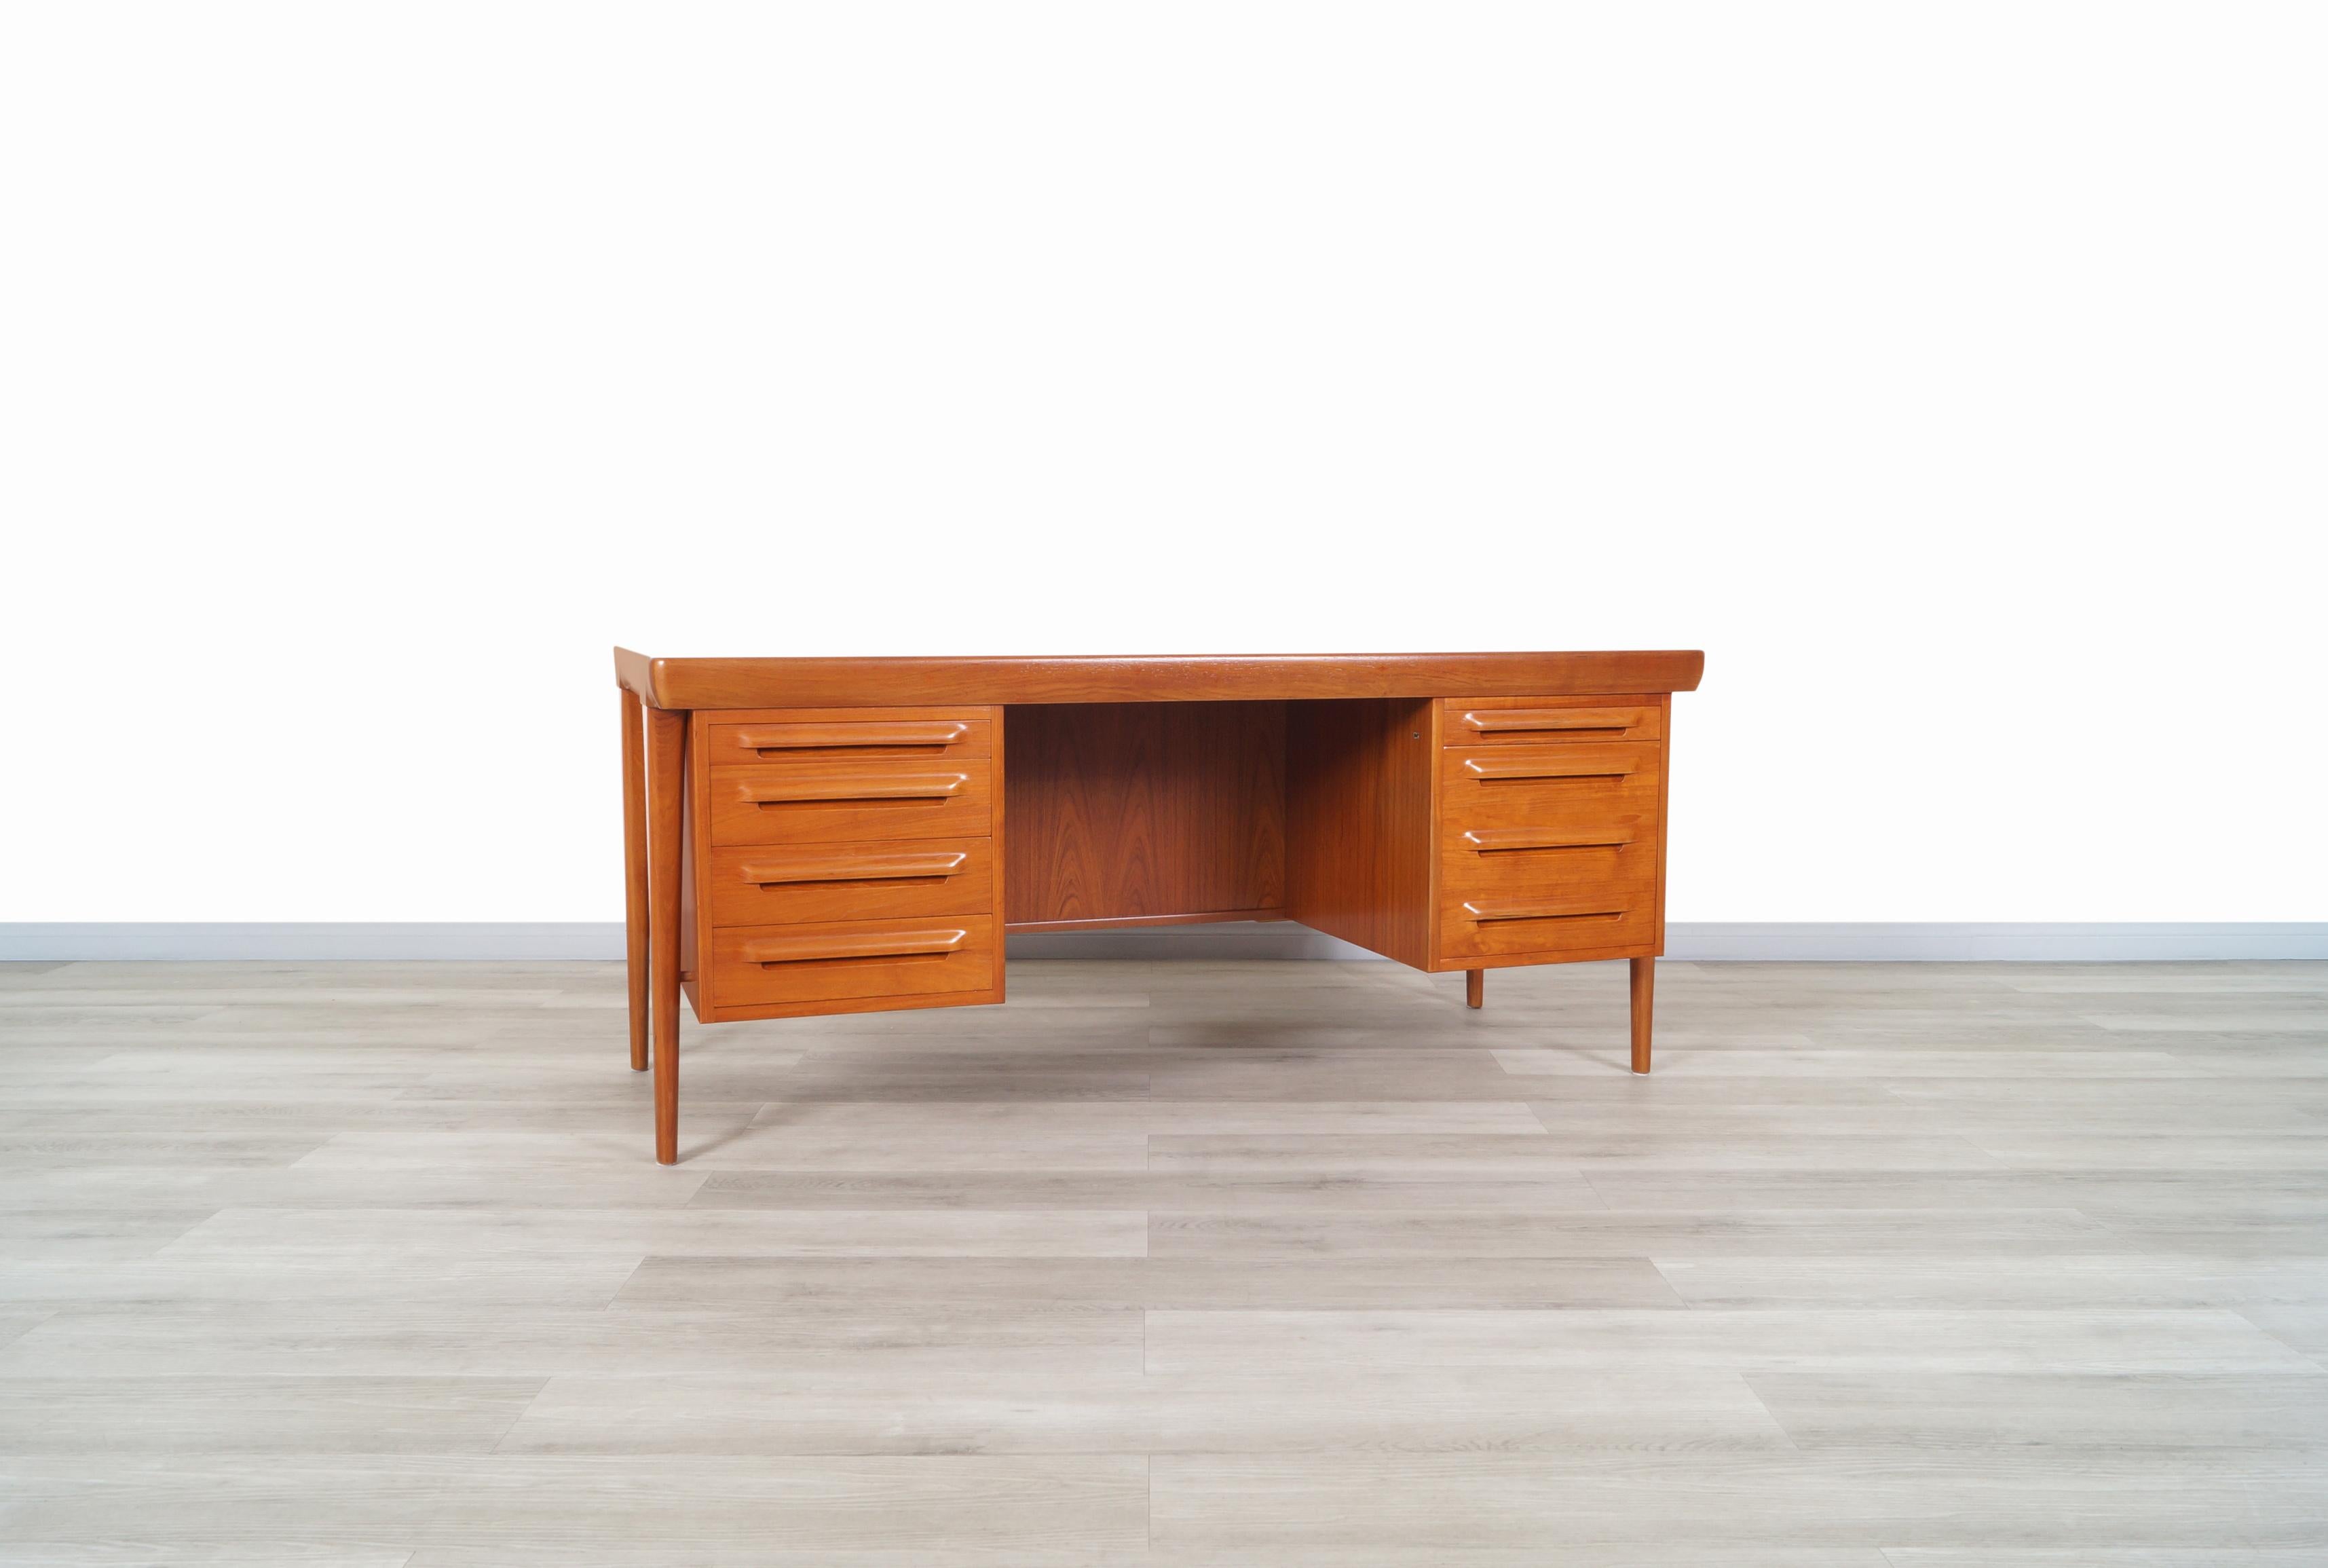 Exceptional Danish teak desk designed by Ib Kofod Larsen for Faarup Møbelfabrik. On the left side features three drawers with a pull-out writing surface, and on the right side, it has a large file drawer with a pull-out writing surface that gives us